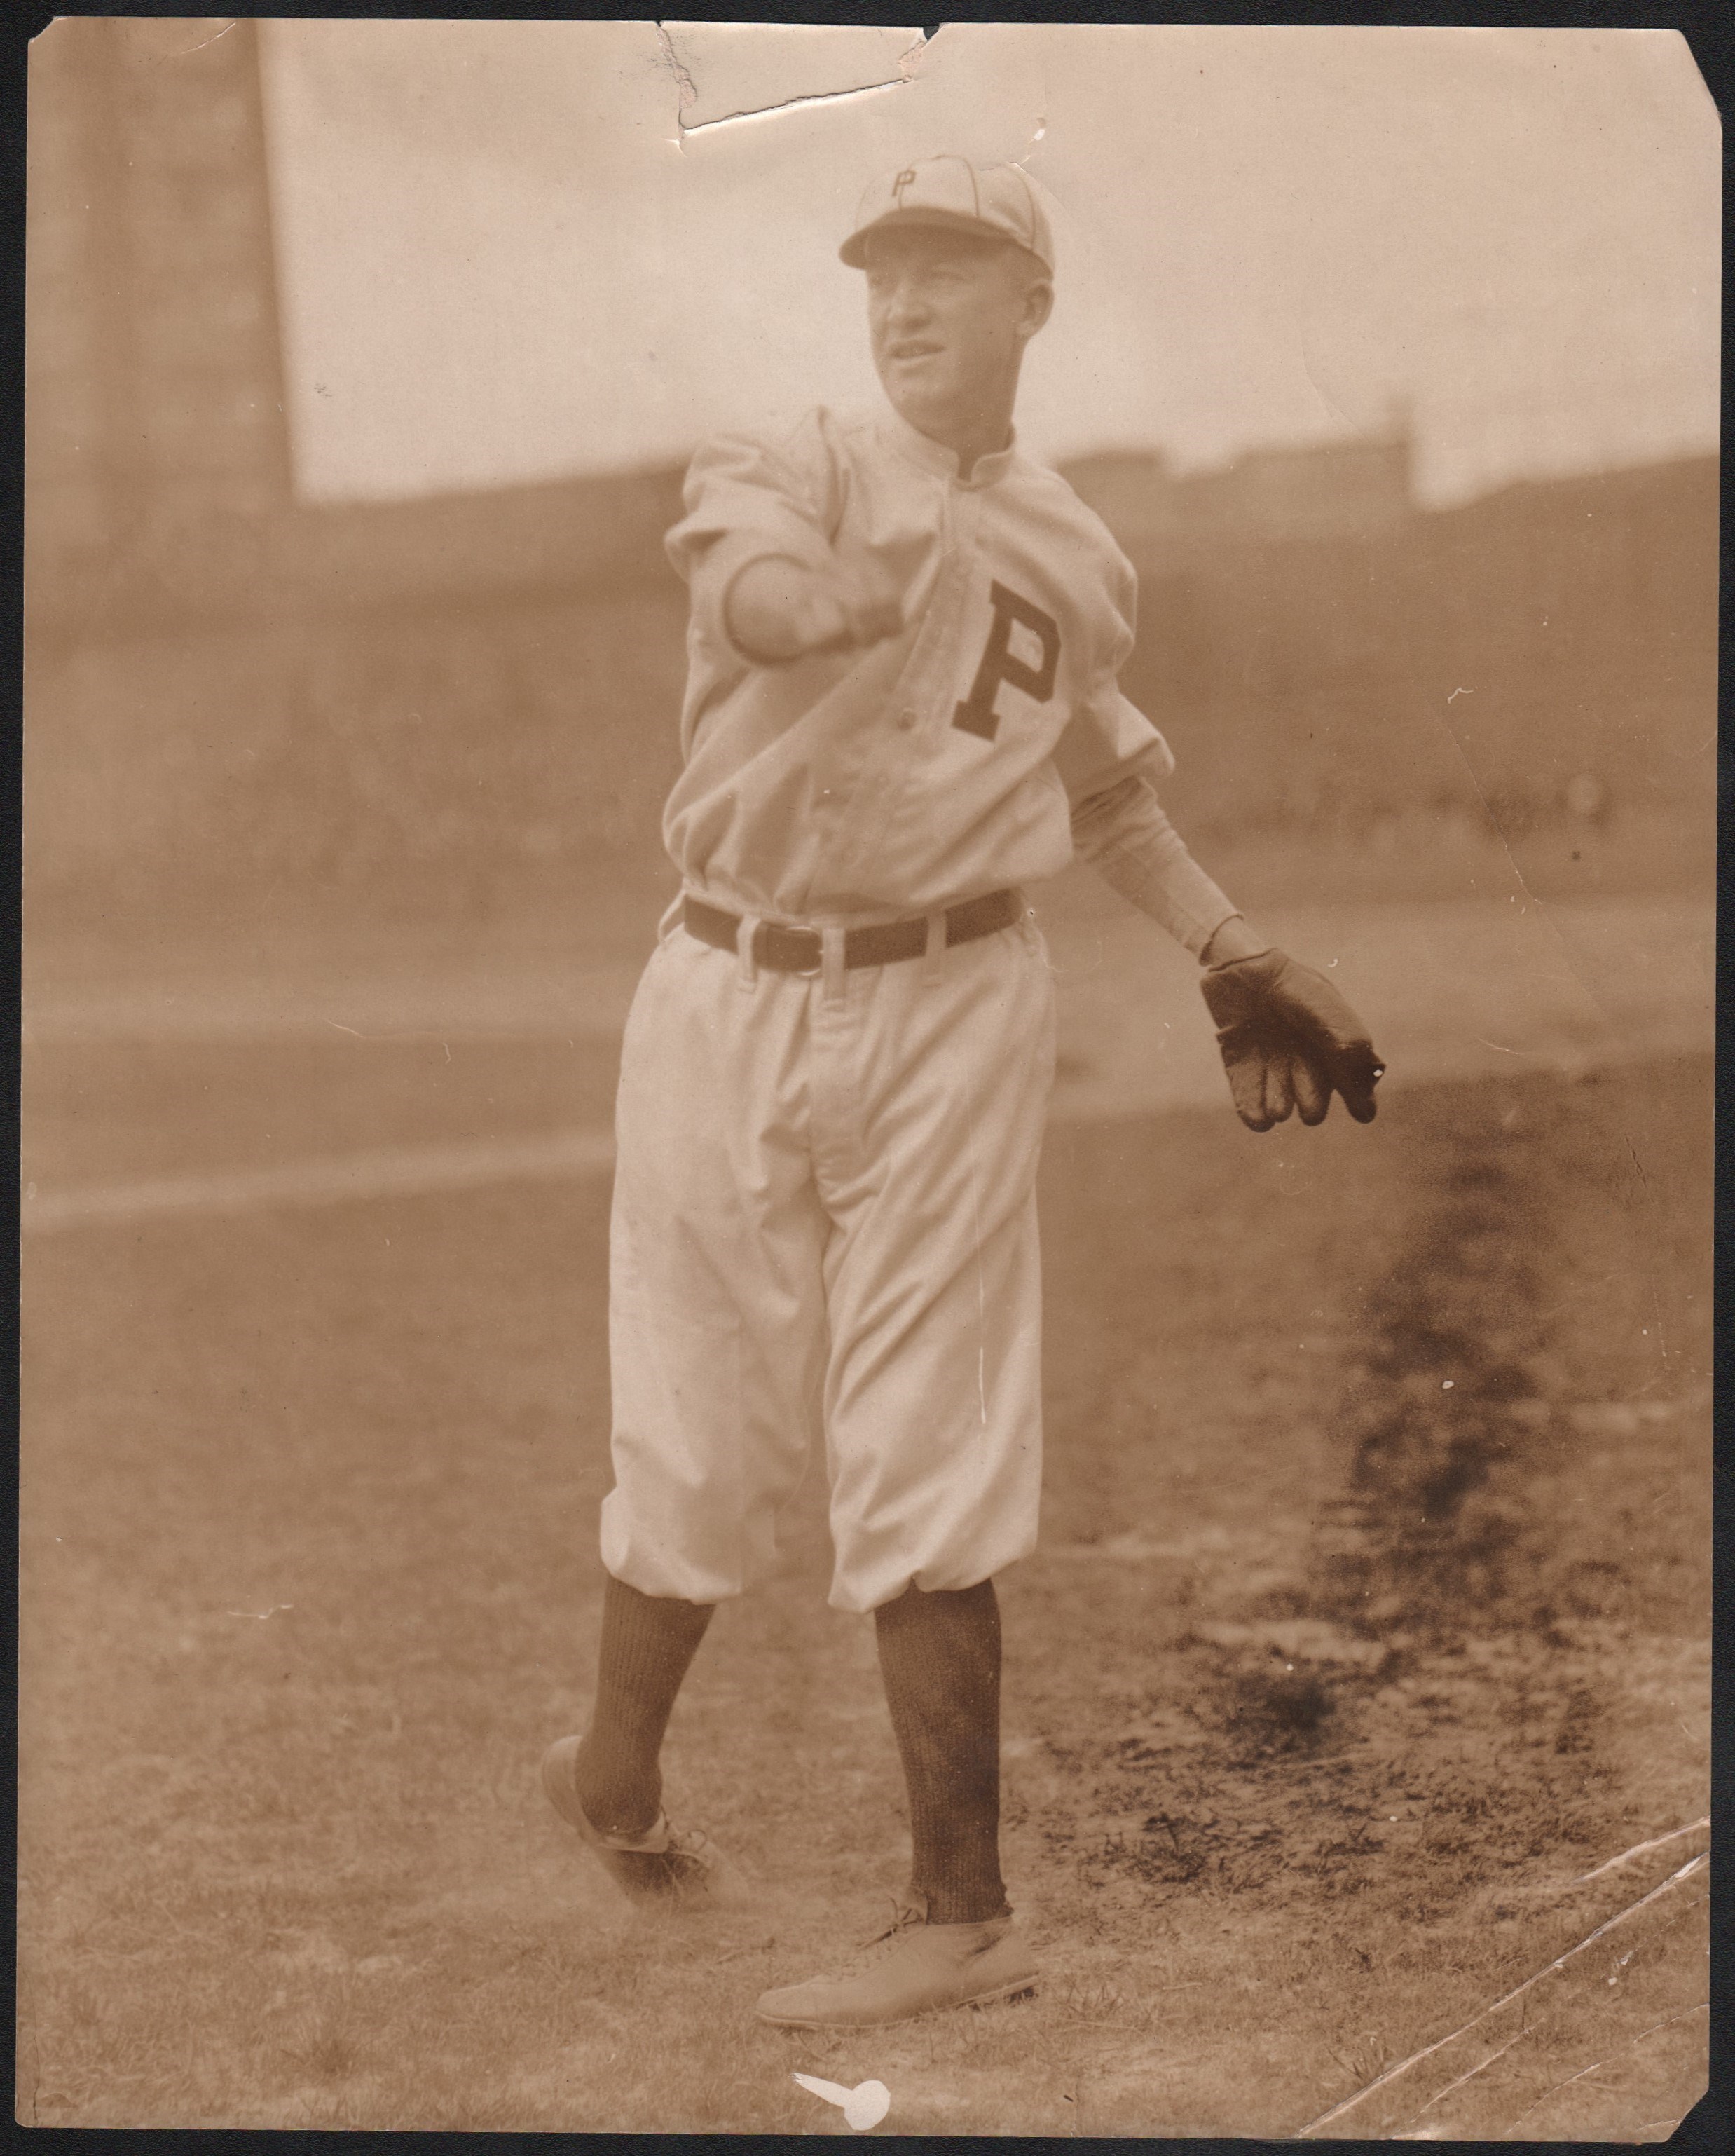 - 1910s Grover Cleveland Alexander Type I Photograph